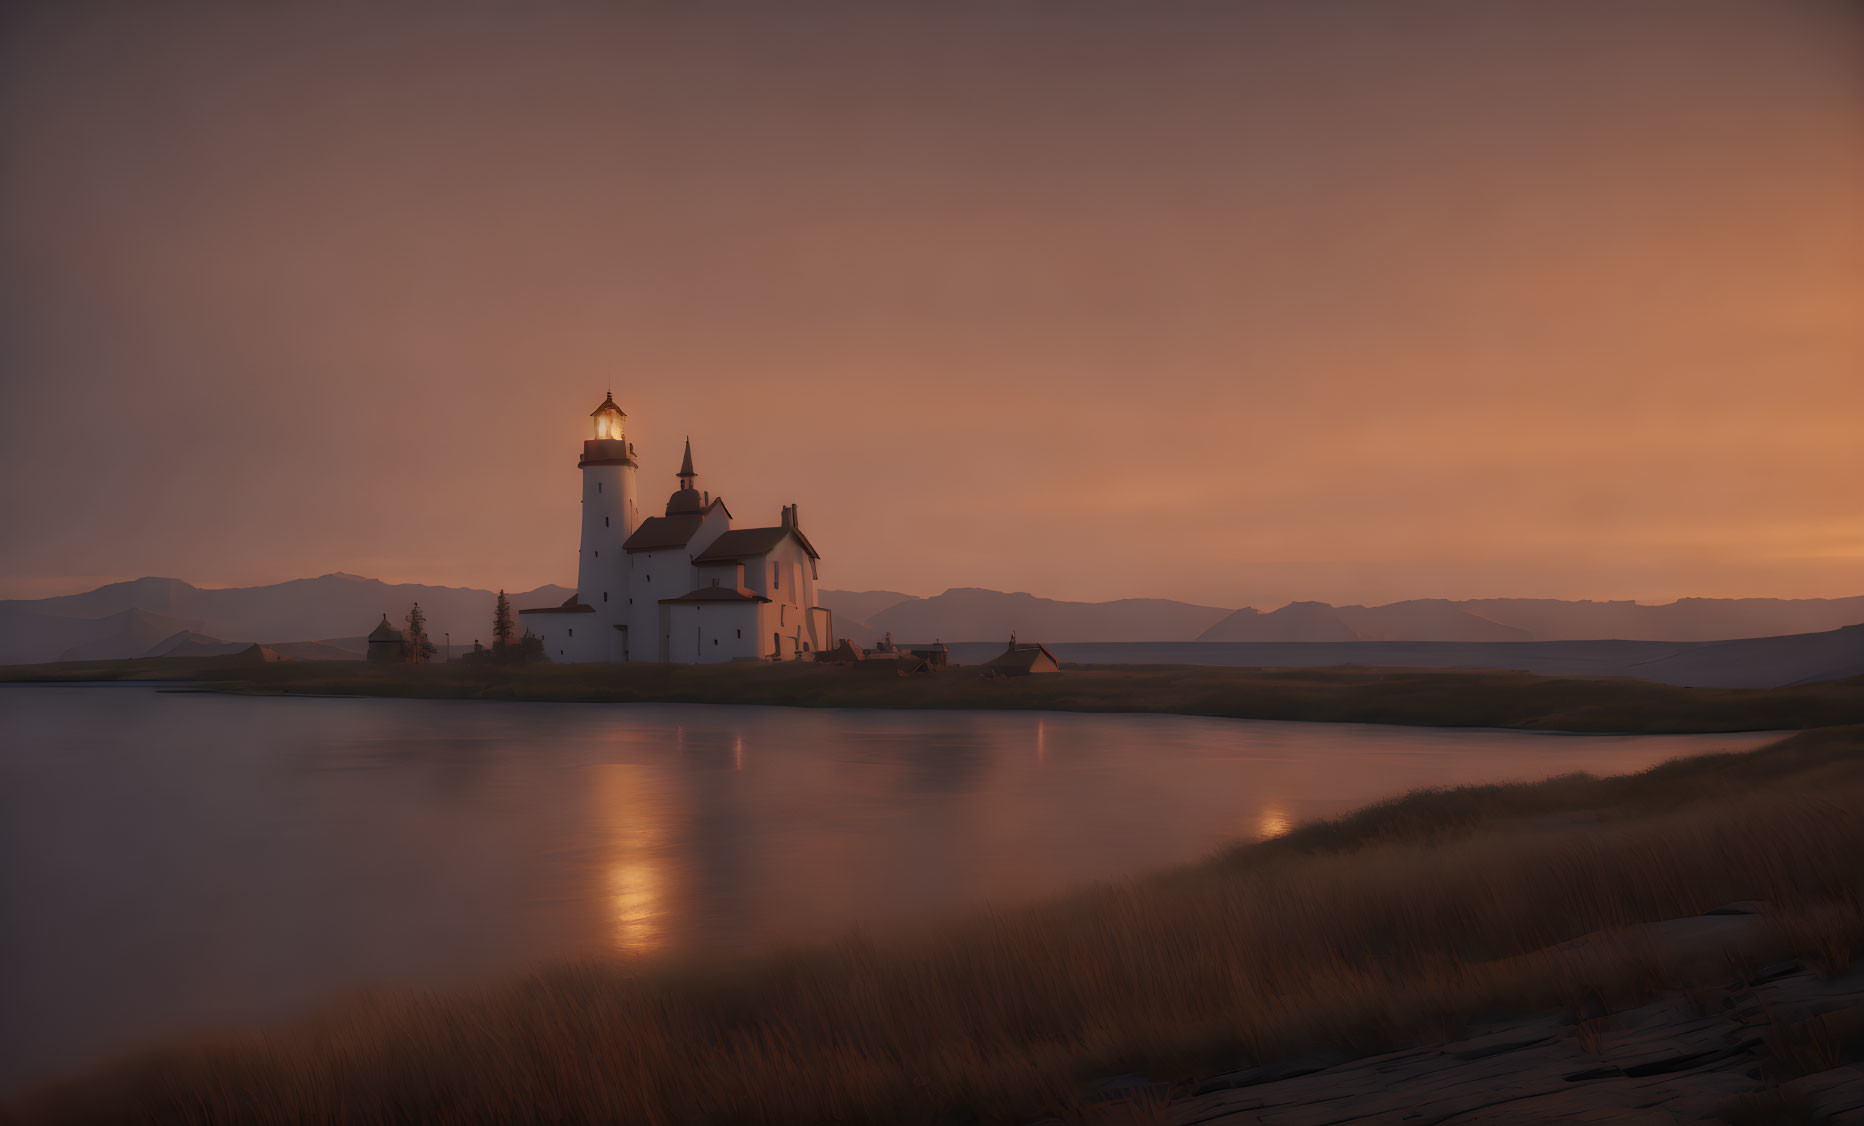 Tranquil sunset scene with lighthouse by calm lake